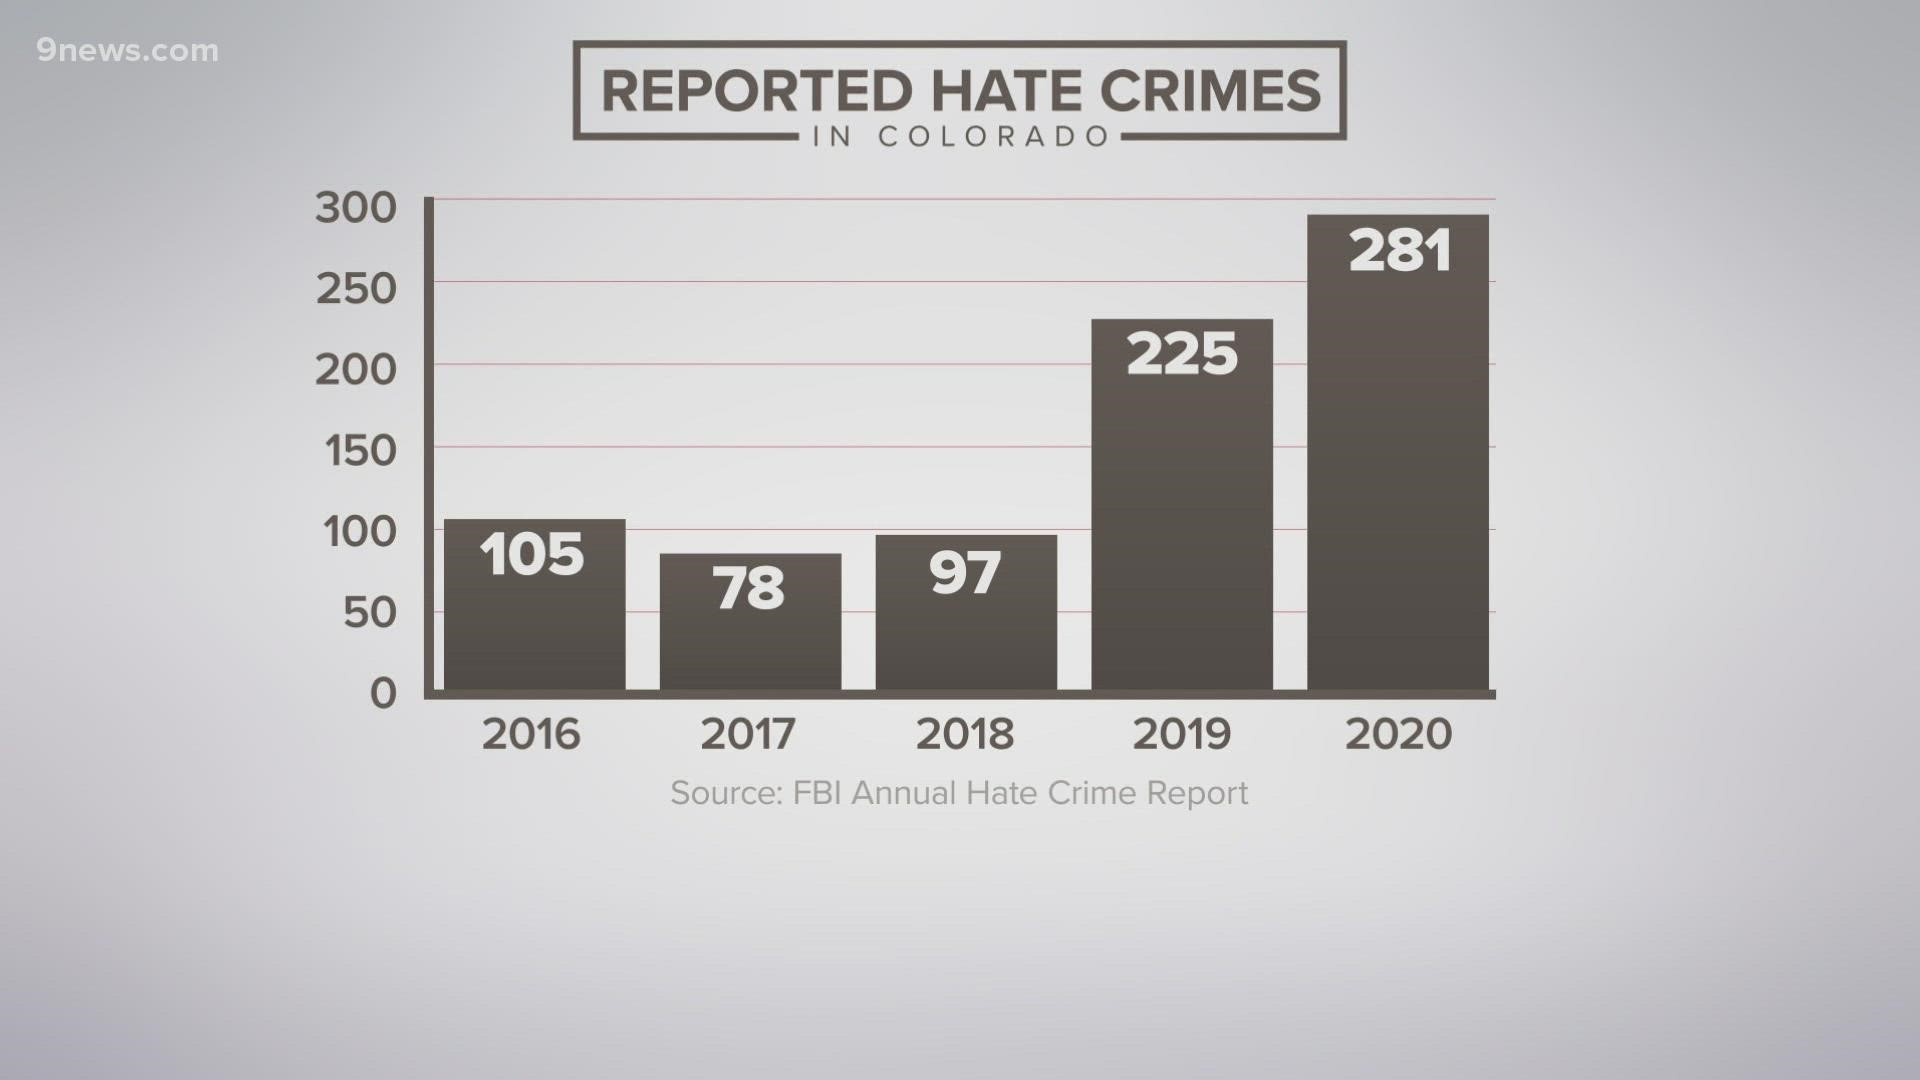 There were 281 reported hate crimes in Colorado in 2020, compared to 225 in 2019.